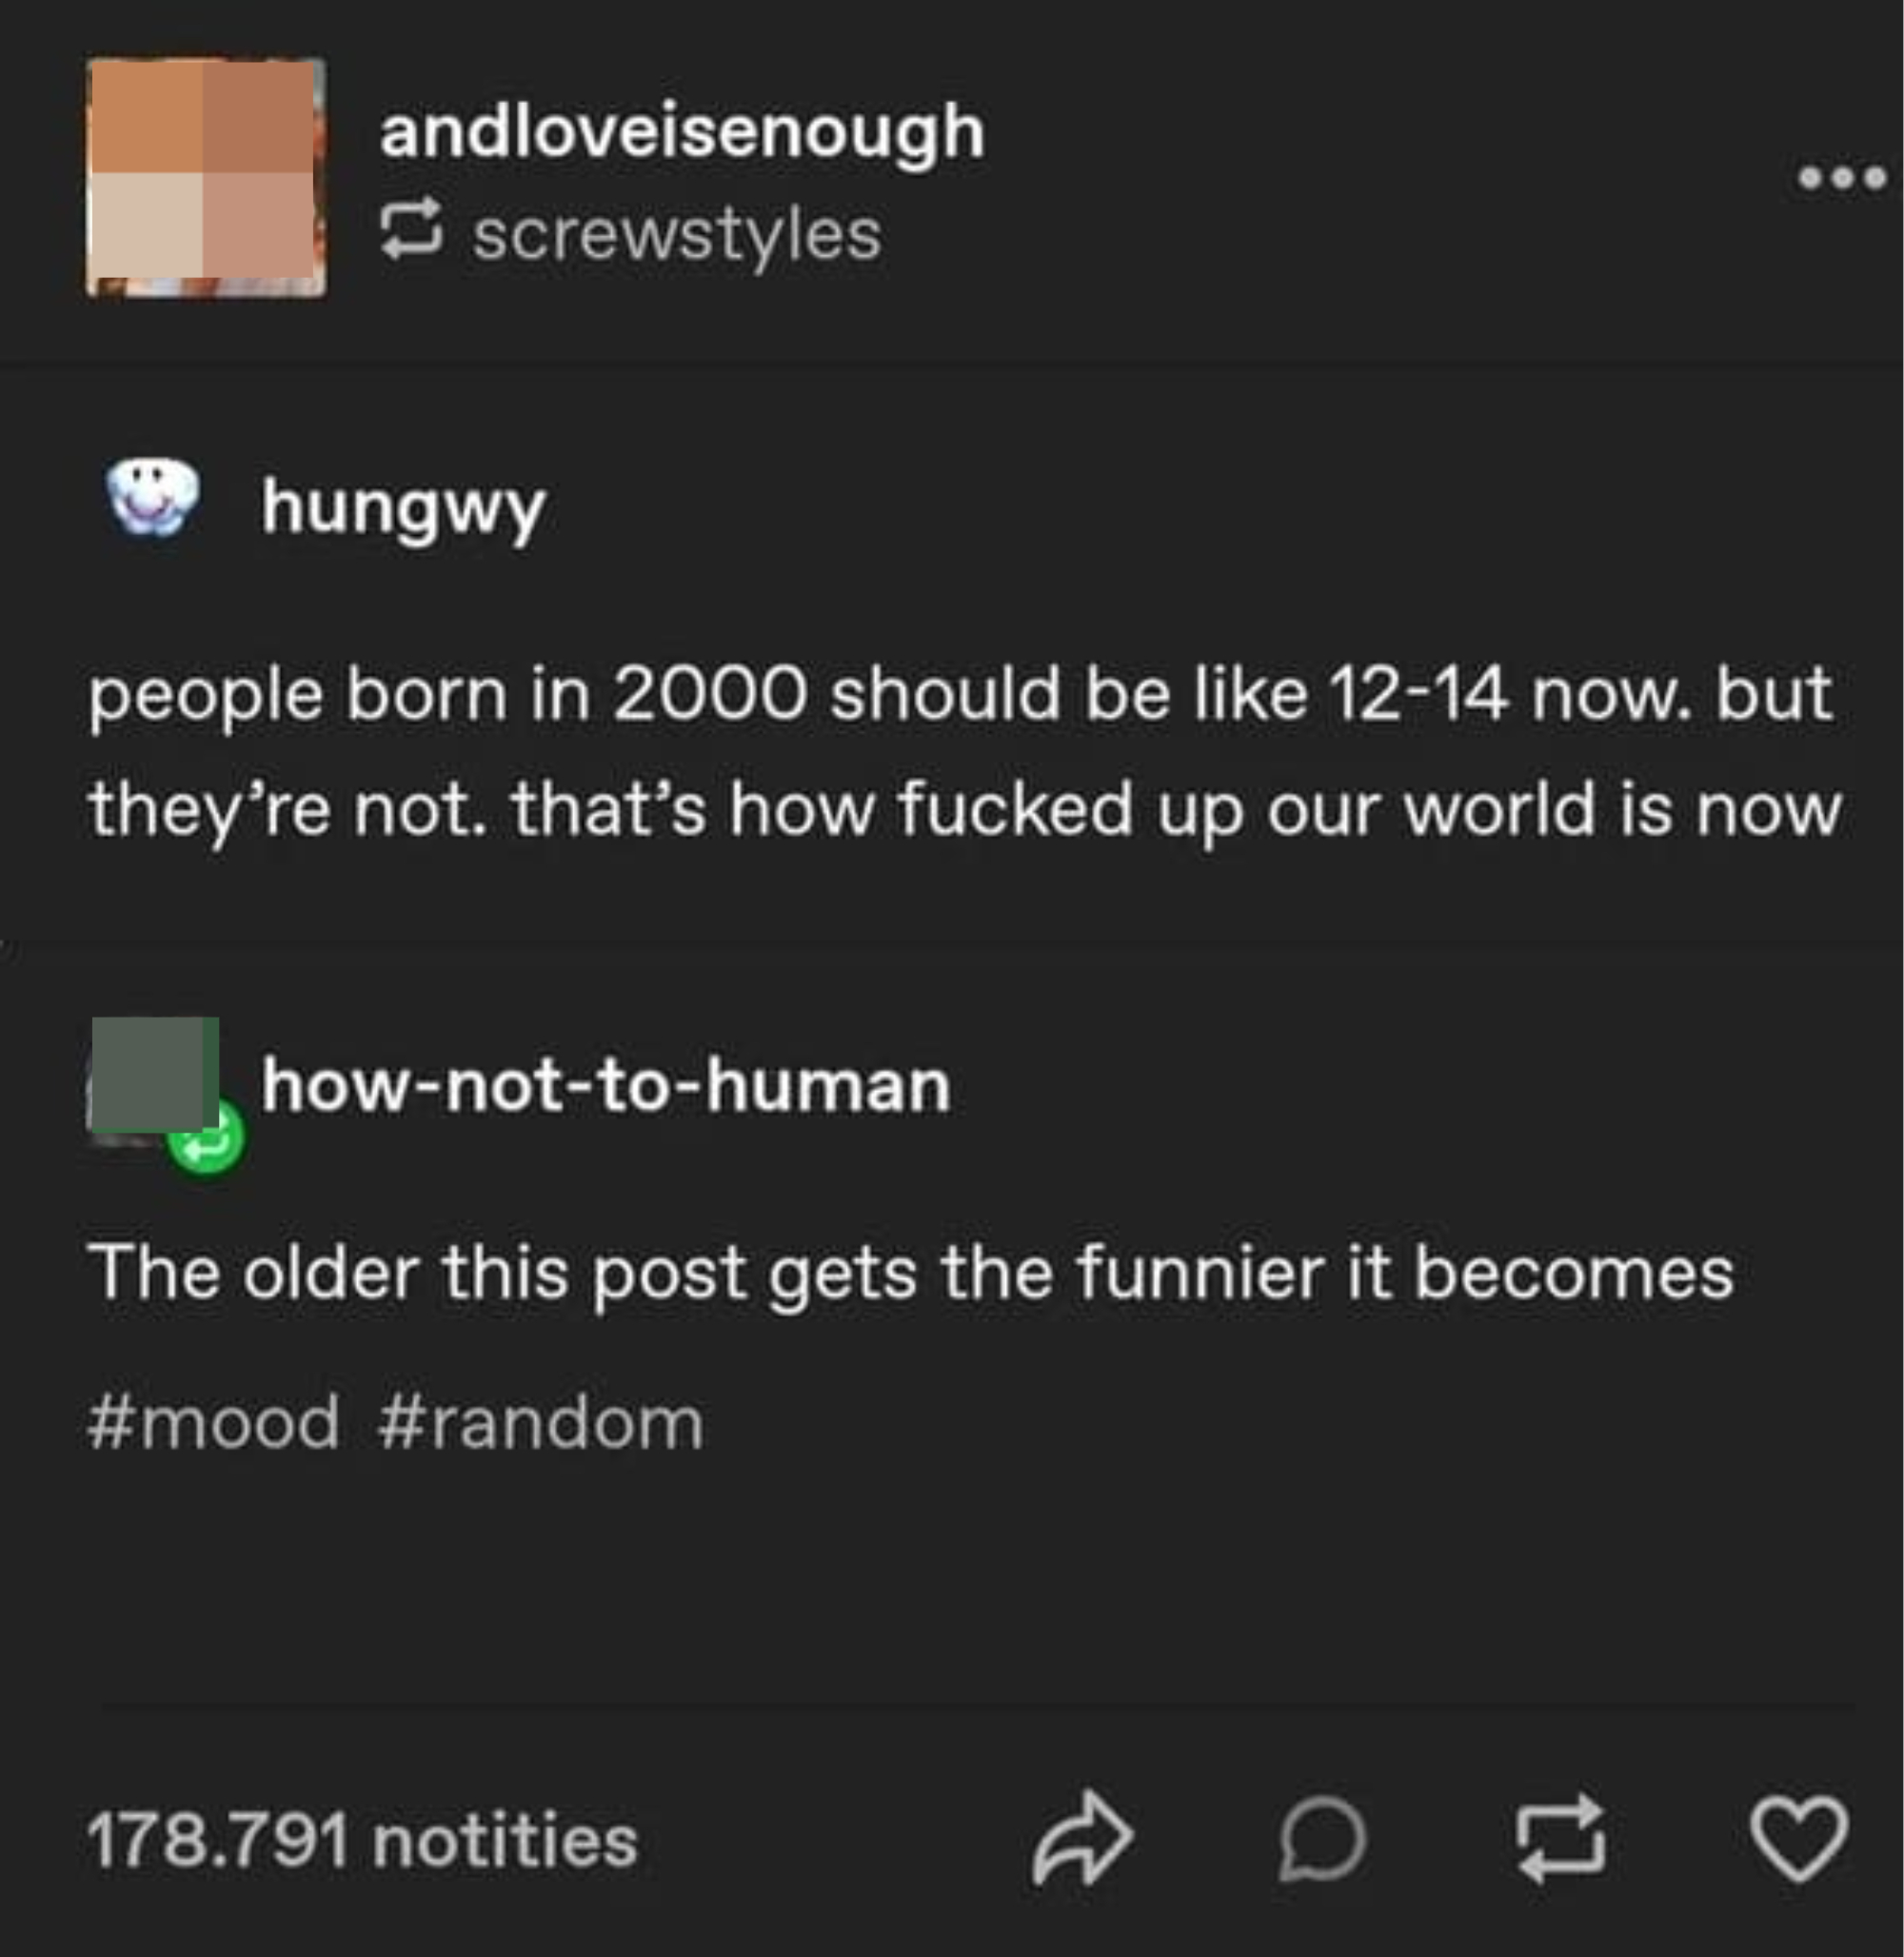 &quot;people born in 2000 should be like 12-14 now but they&#x27;re not; that&#x27;s how fucked up our world is now&quot; &quot;The older this post gets the funnier it becomes&quot;